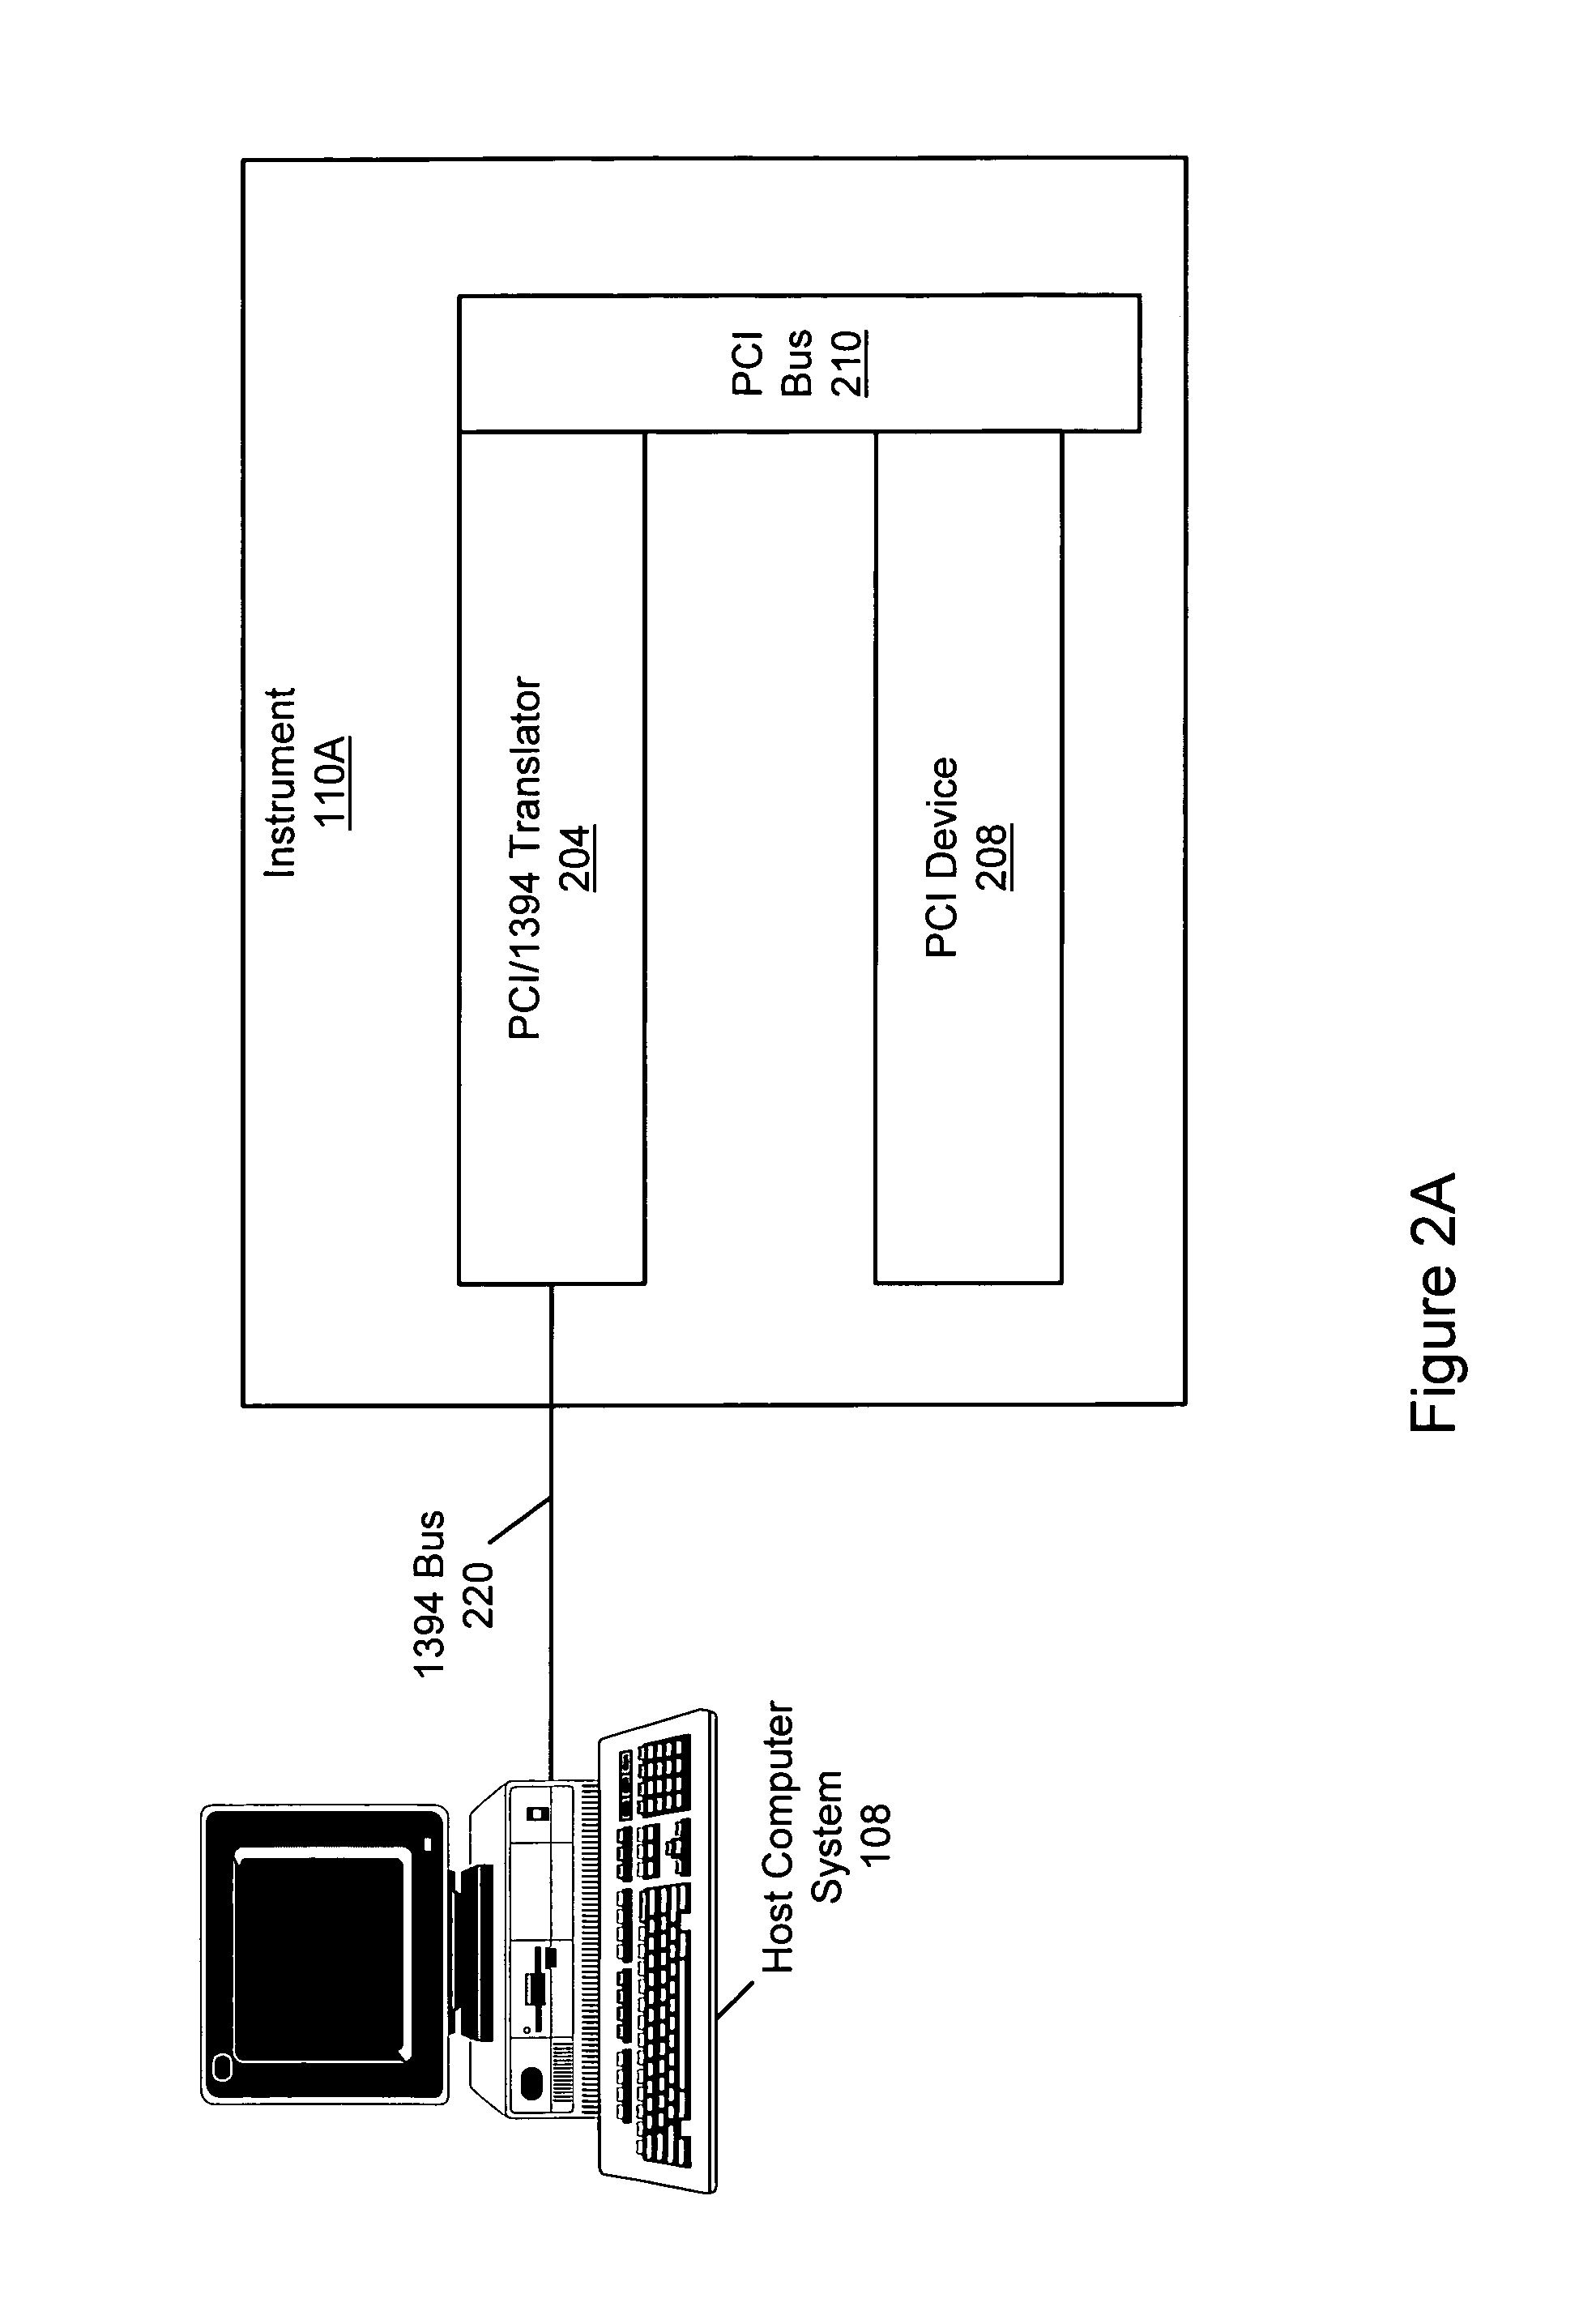 System and method for transferring data over an external transmission medium